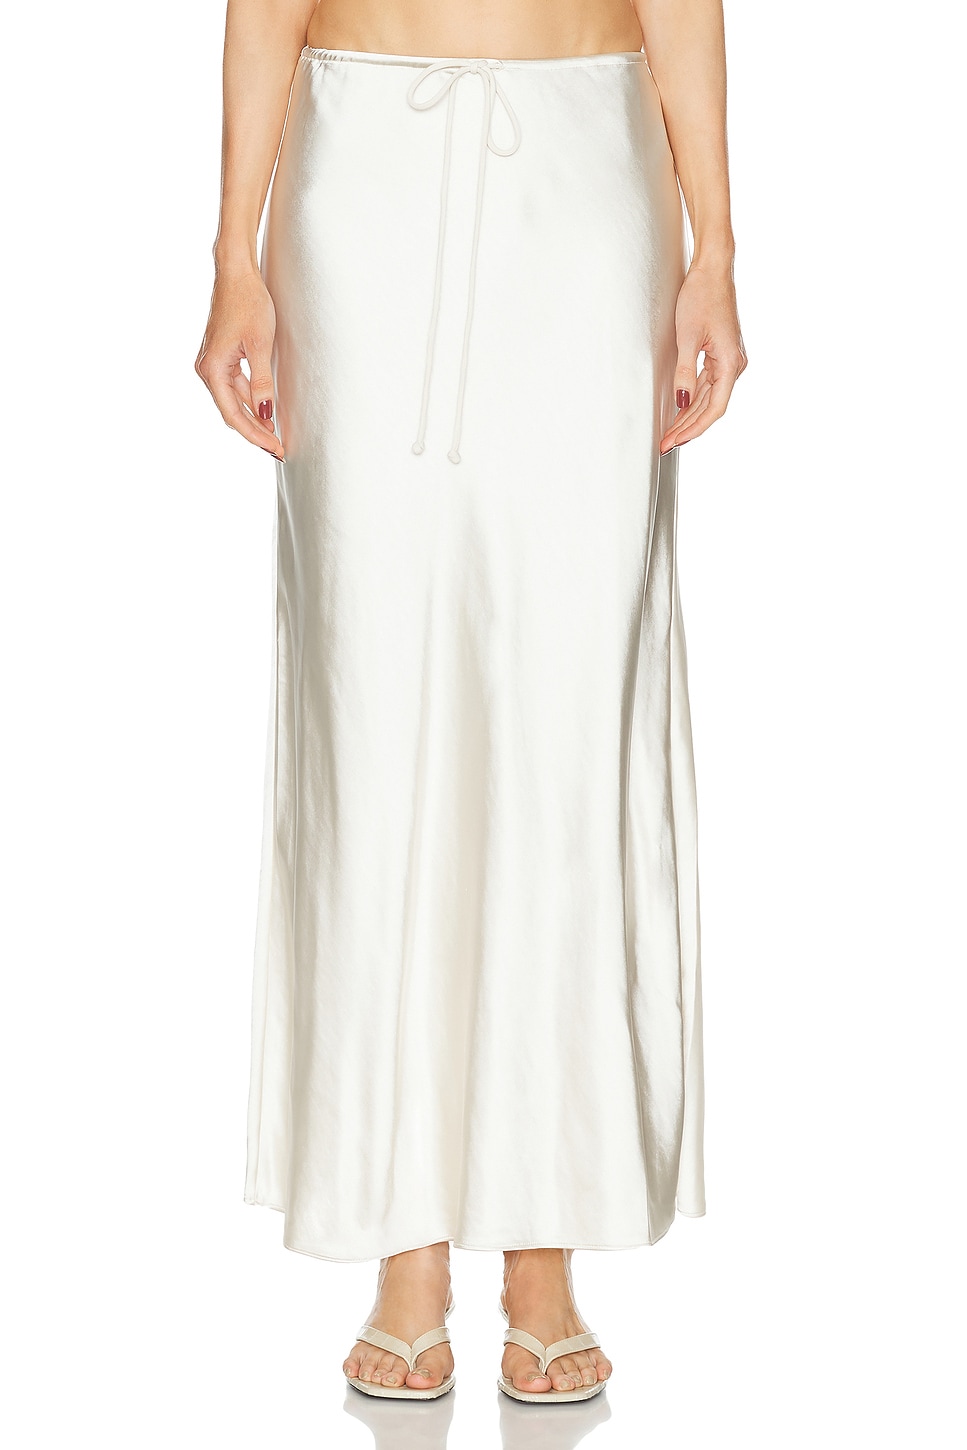 Image 1 of L'Academie by Marianna Etienne Midi Skirt in Ivory